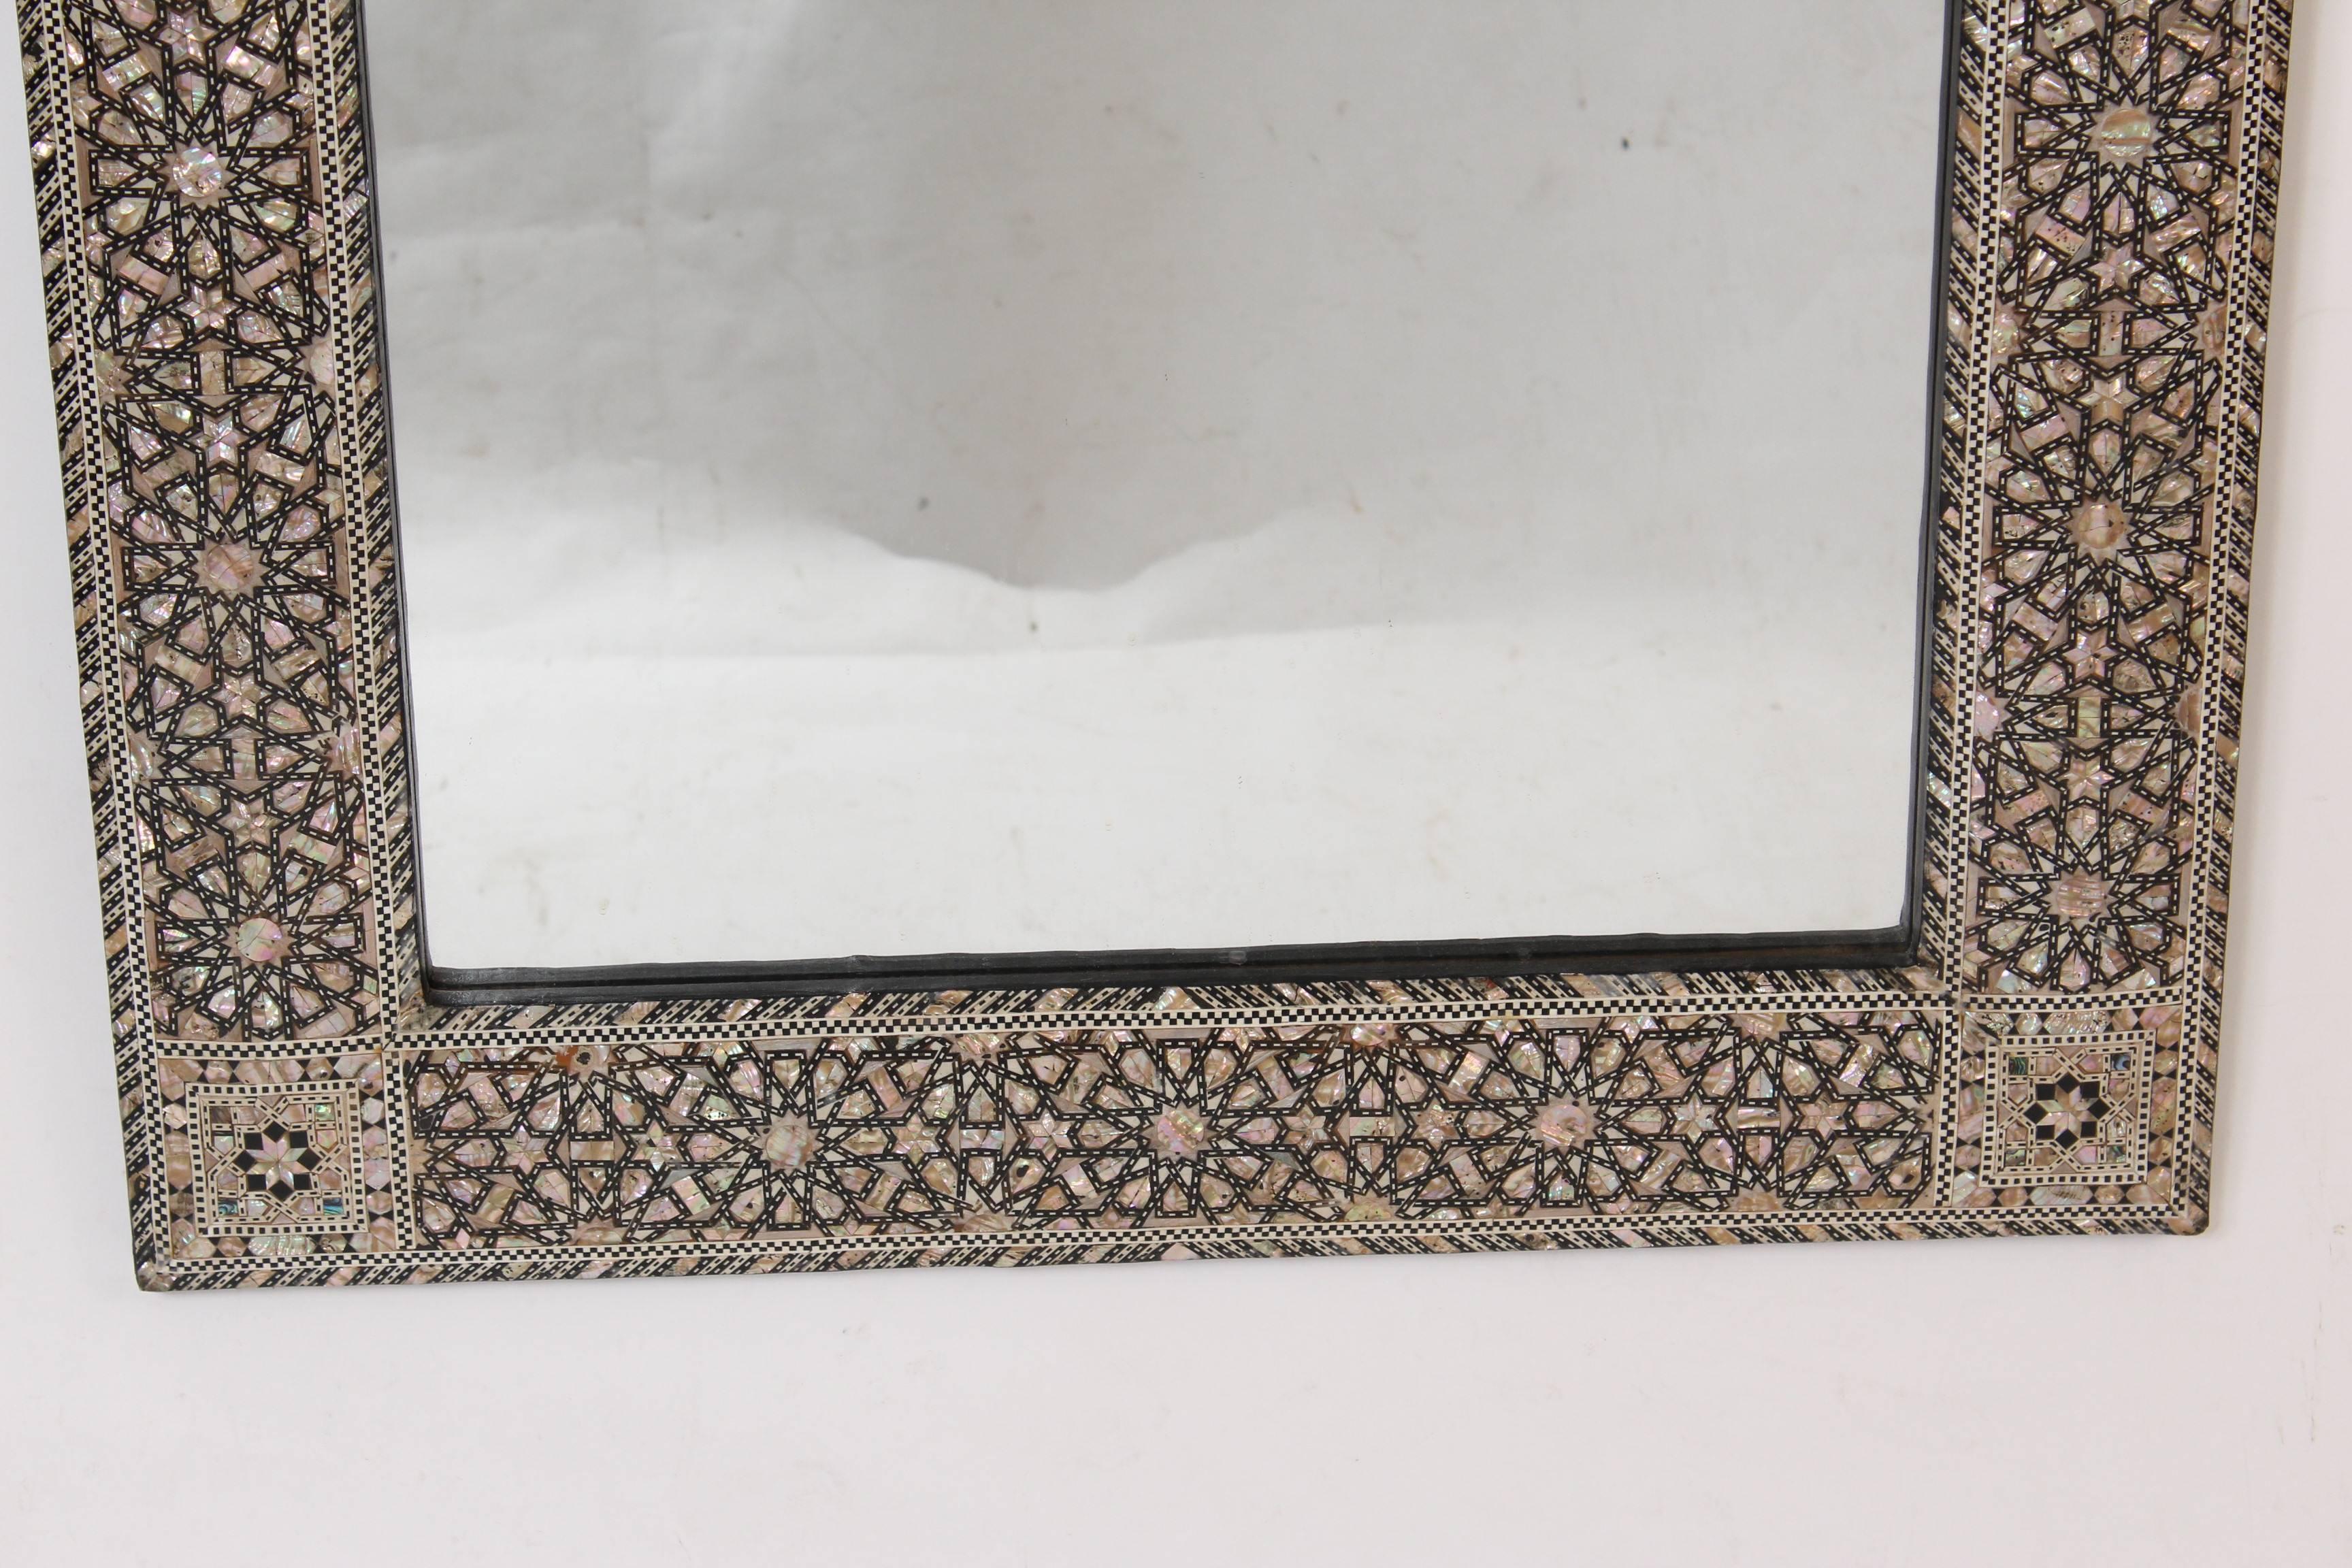 20th Century Middle Eastern Mother-of-Pearl Inlaid Mirror